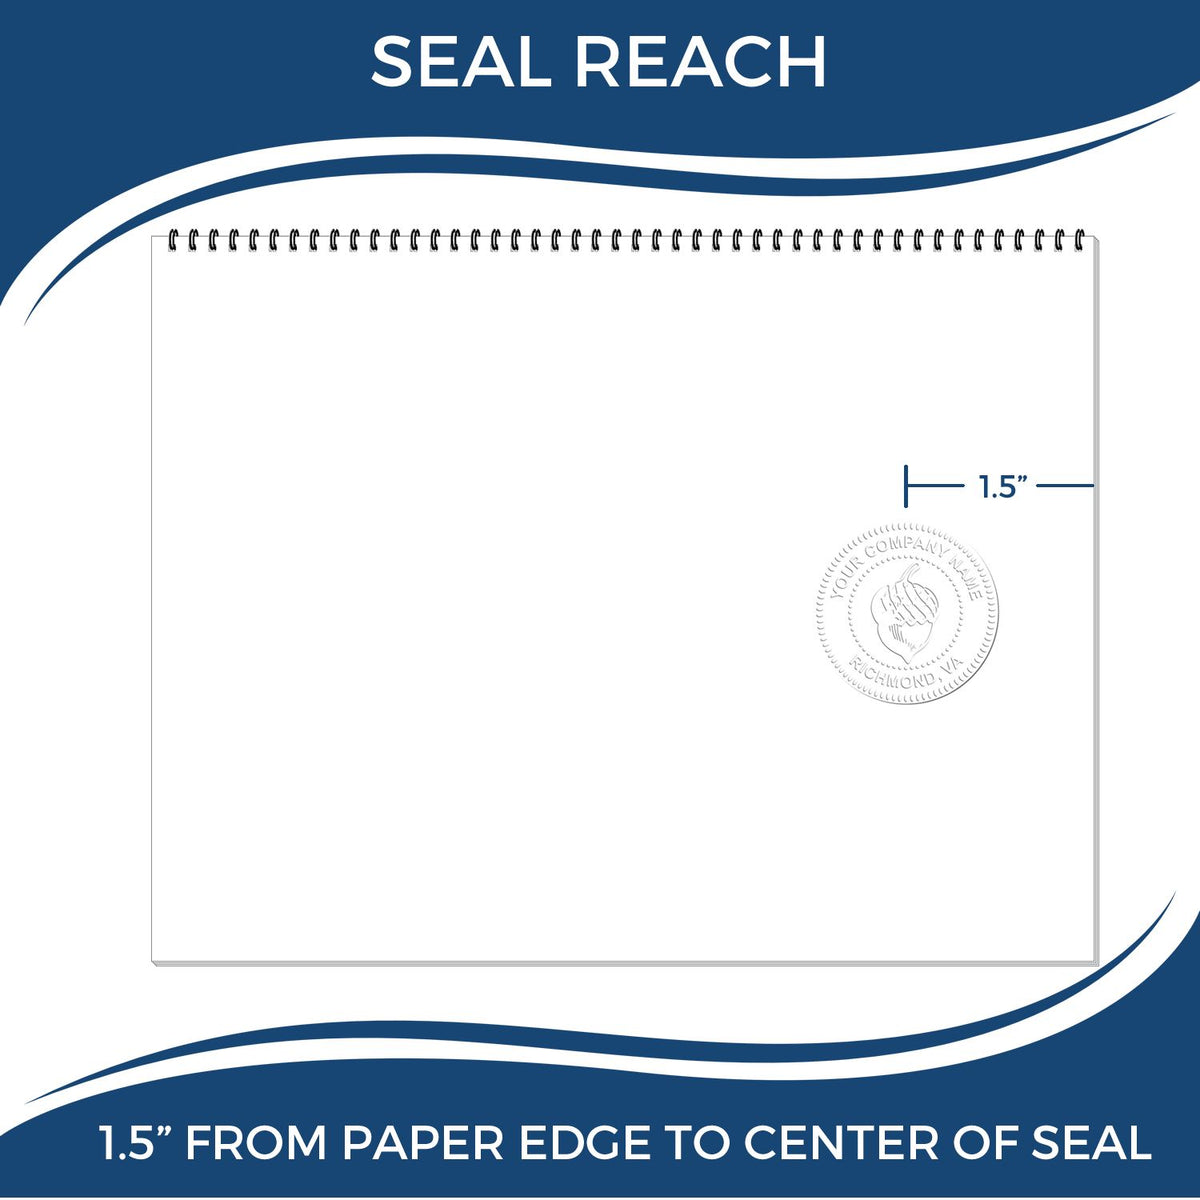 An infographic showing the seal reach which is represented by a ruler and a miniature seal image of the State of Minnesota Architectural Seal Embosser